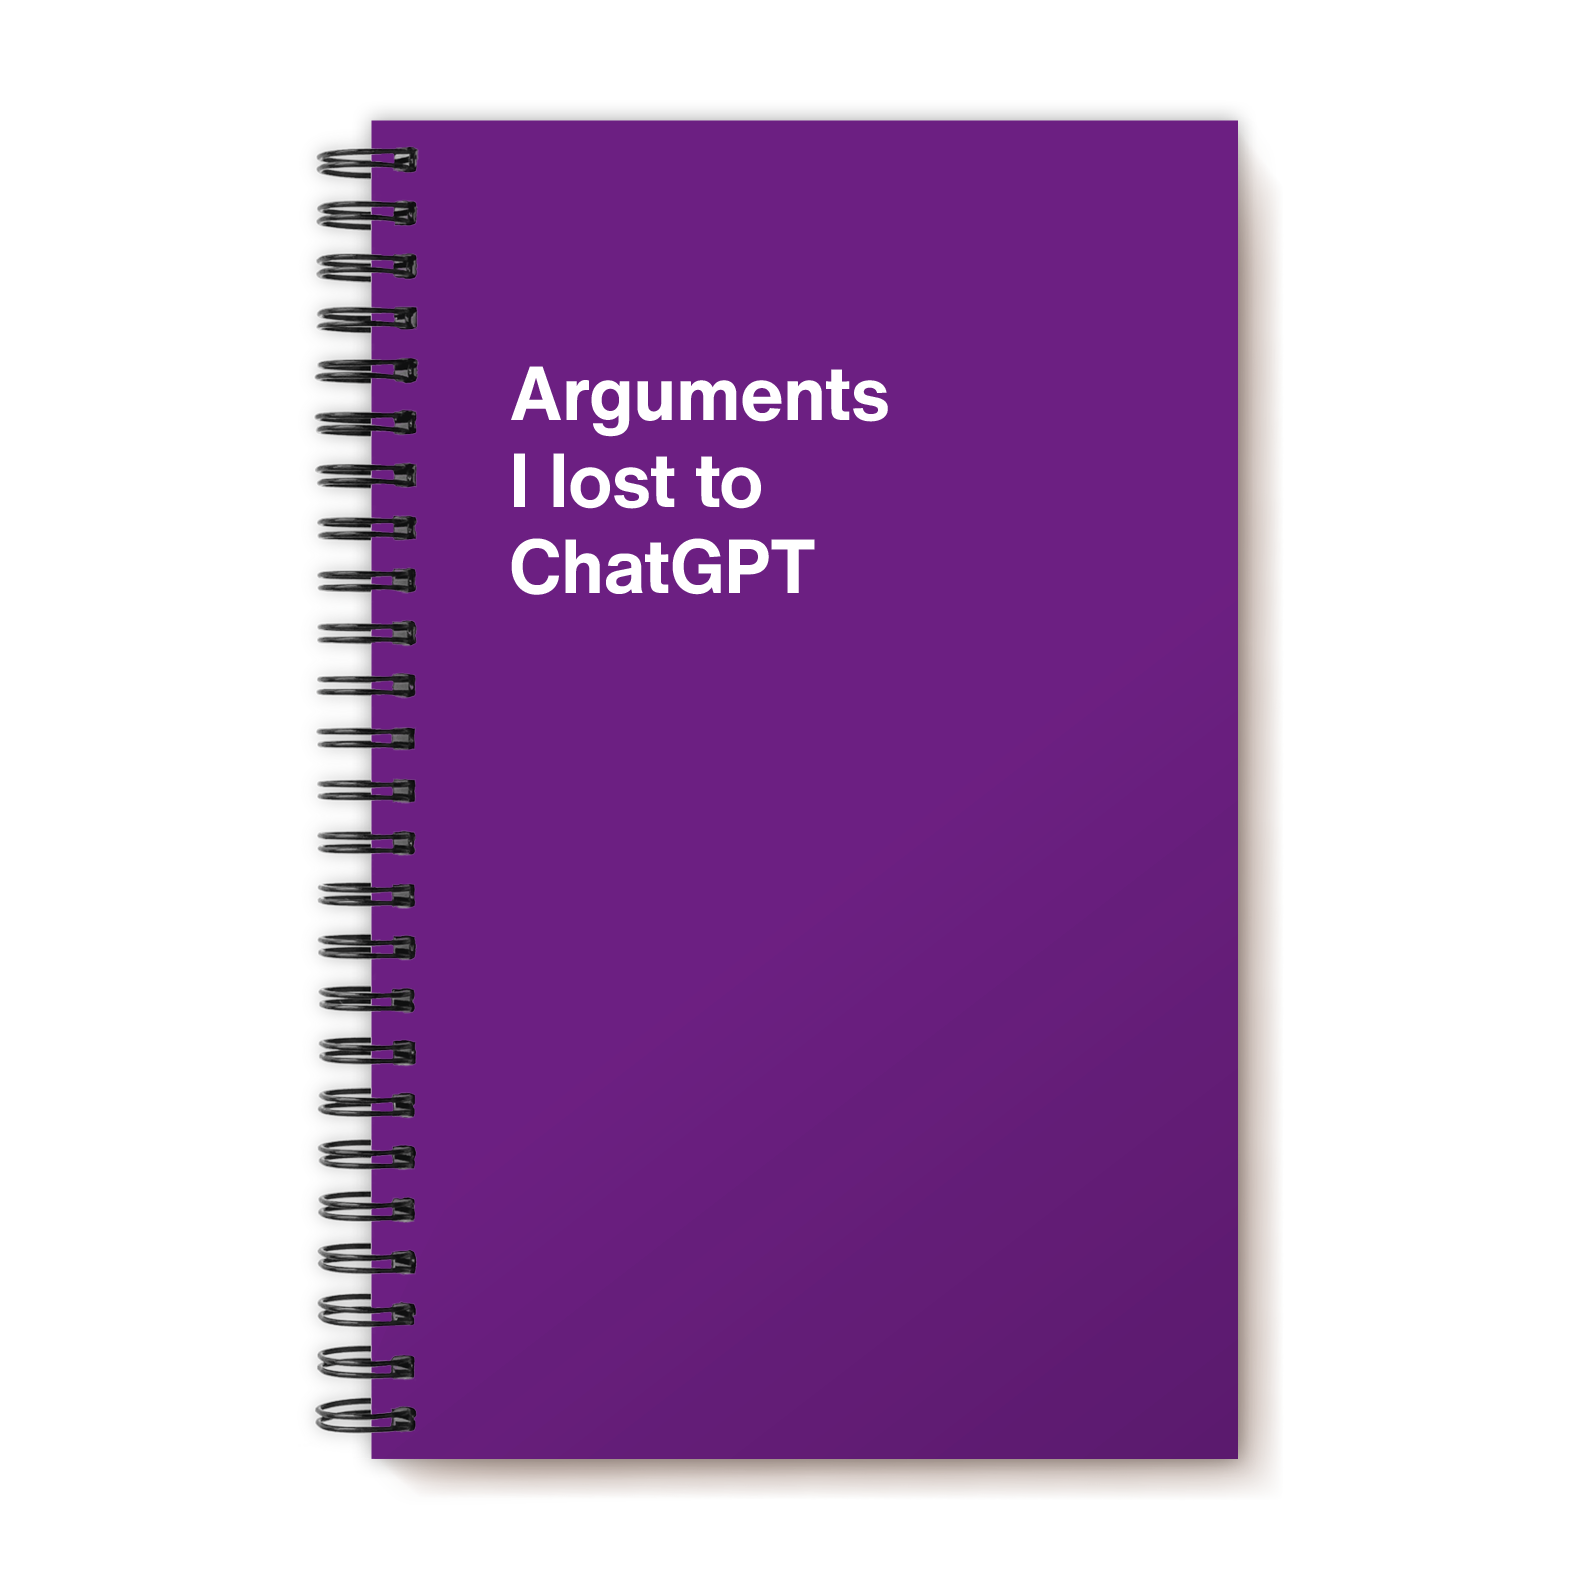 Arguments I lost to ChatGPT